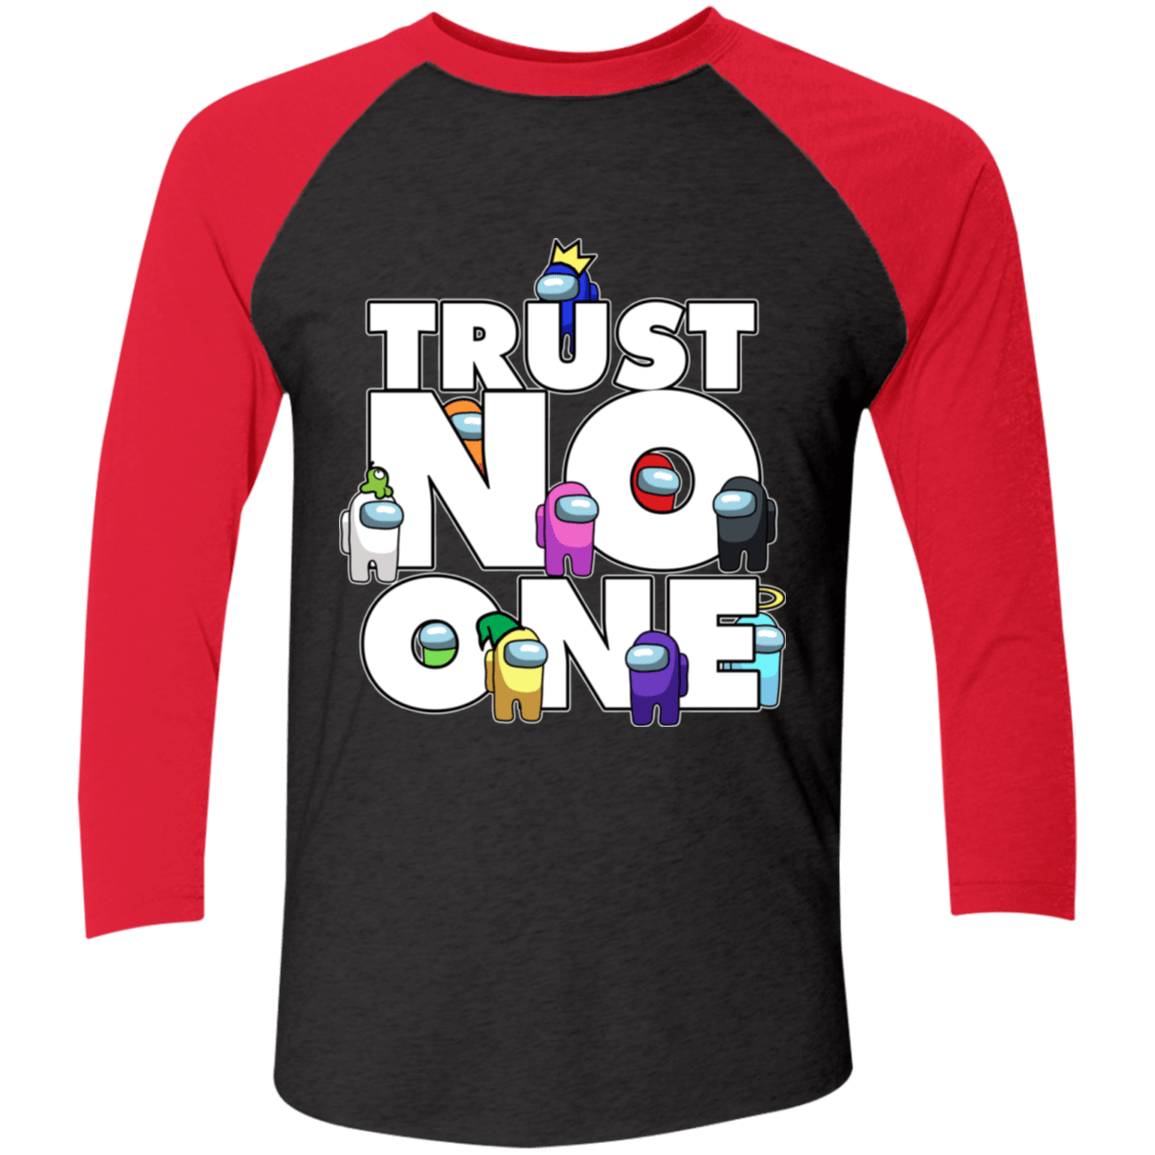 T-Shirts Vintage Black/Vintage Red / X-Small Among Us Trust No One Men's Triblend 3/4 Sleeve